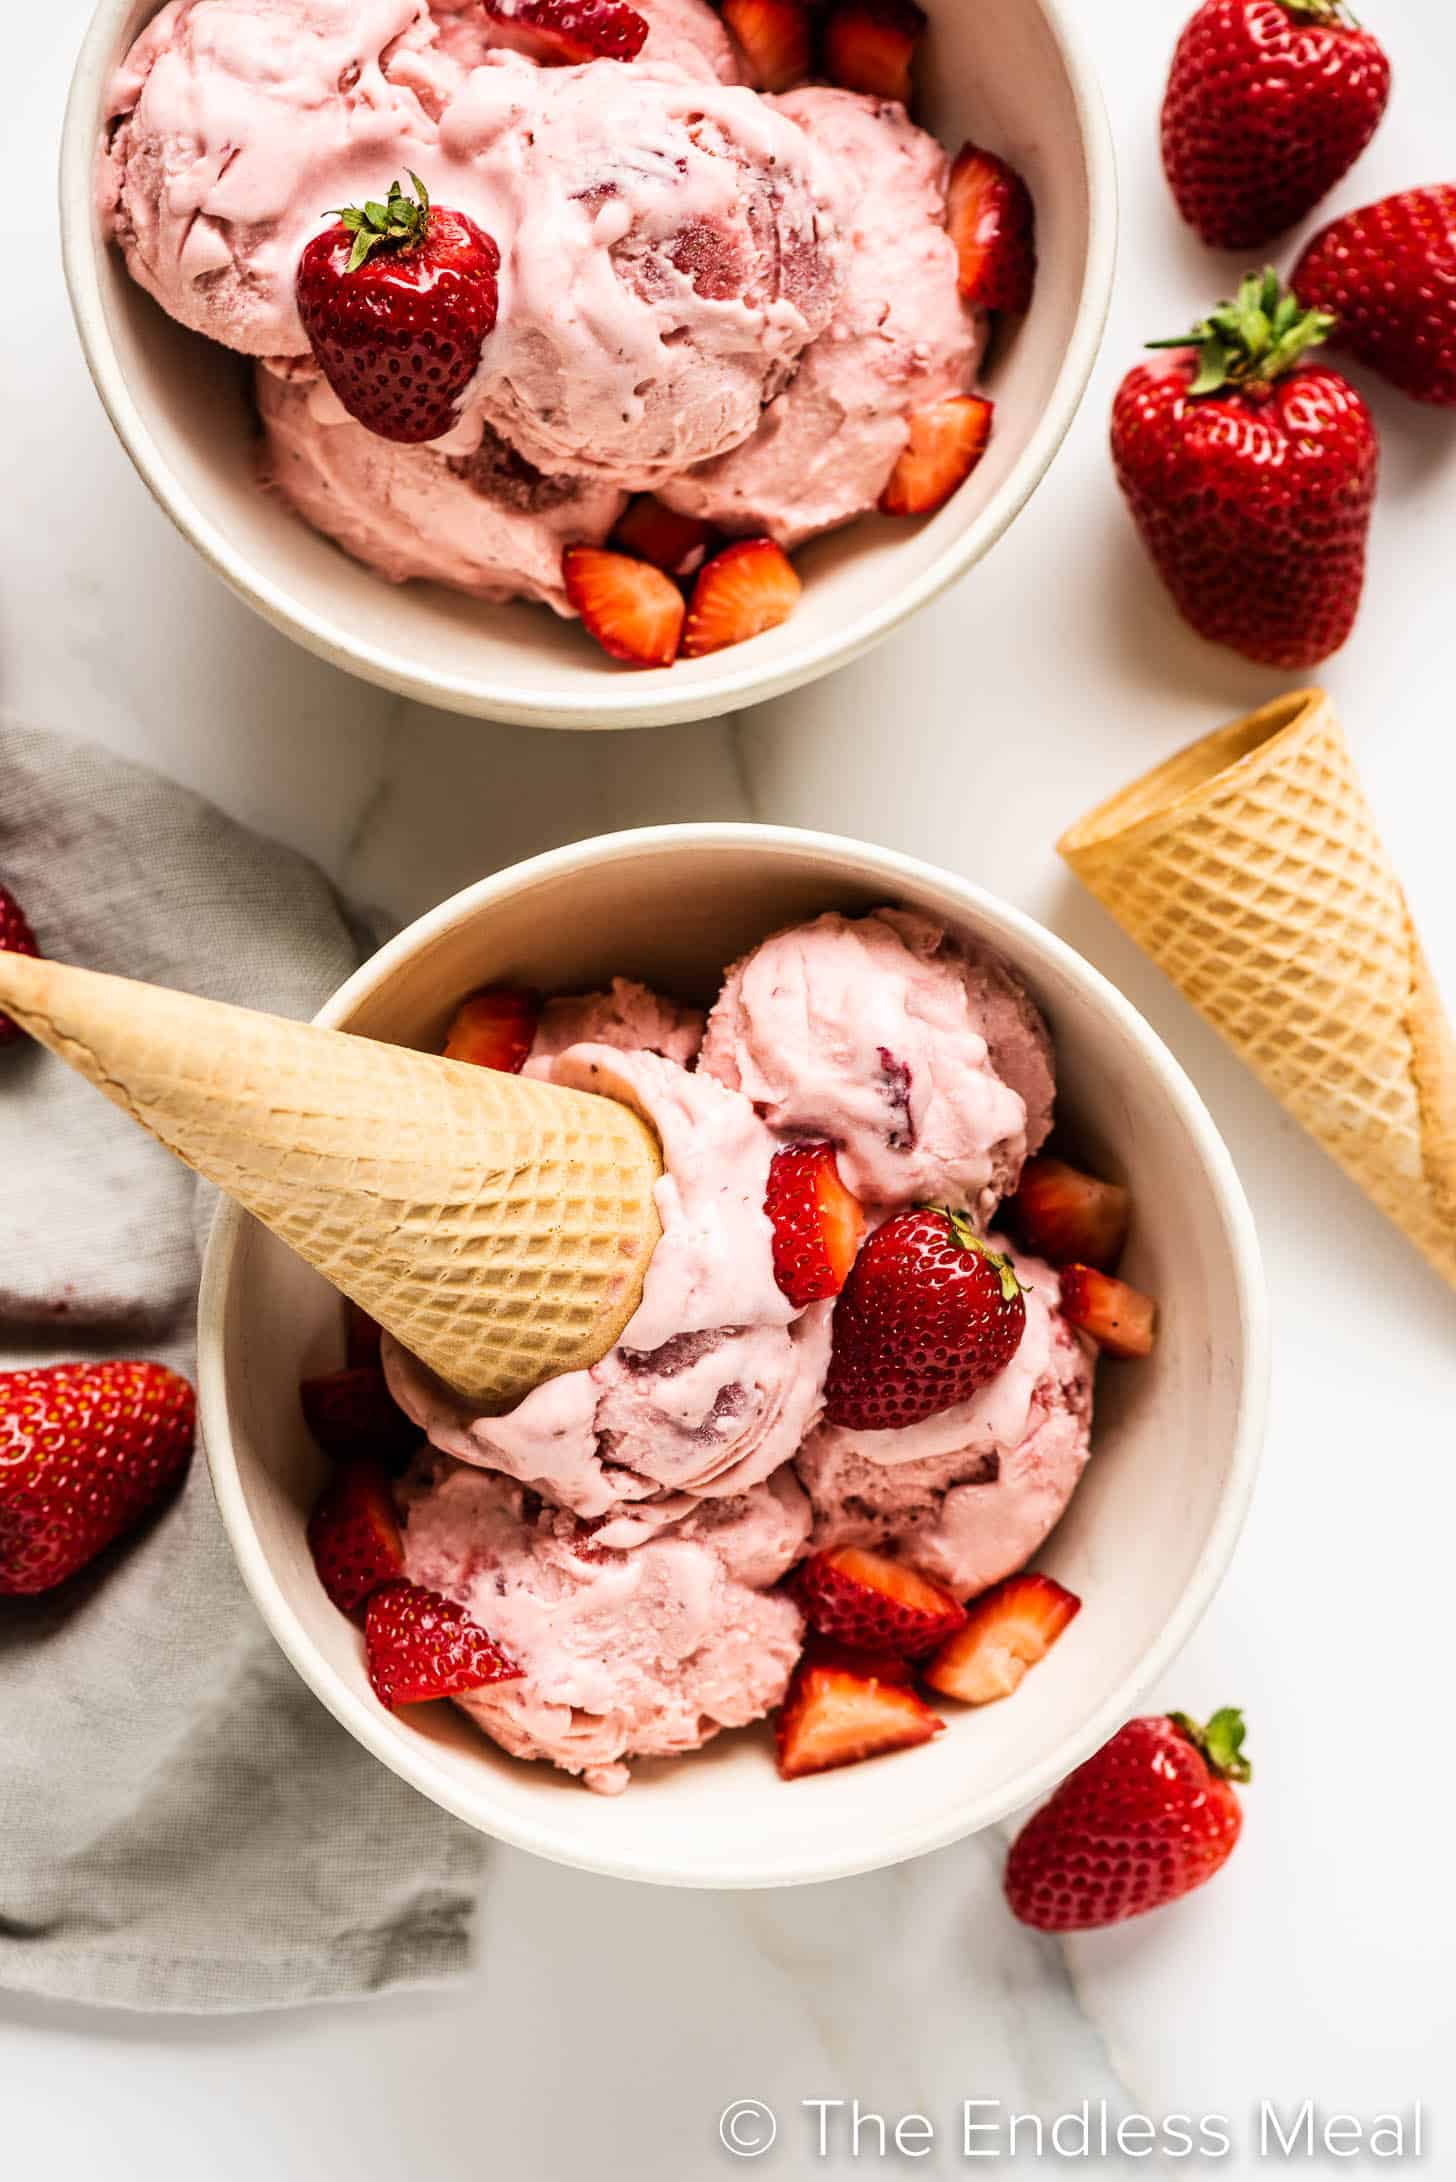 eksekverbar domæne fjols The Best Strawberry Ice Cream Recipe - The Endless Meal®